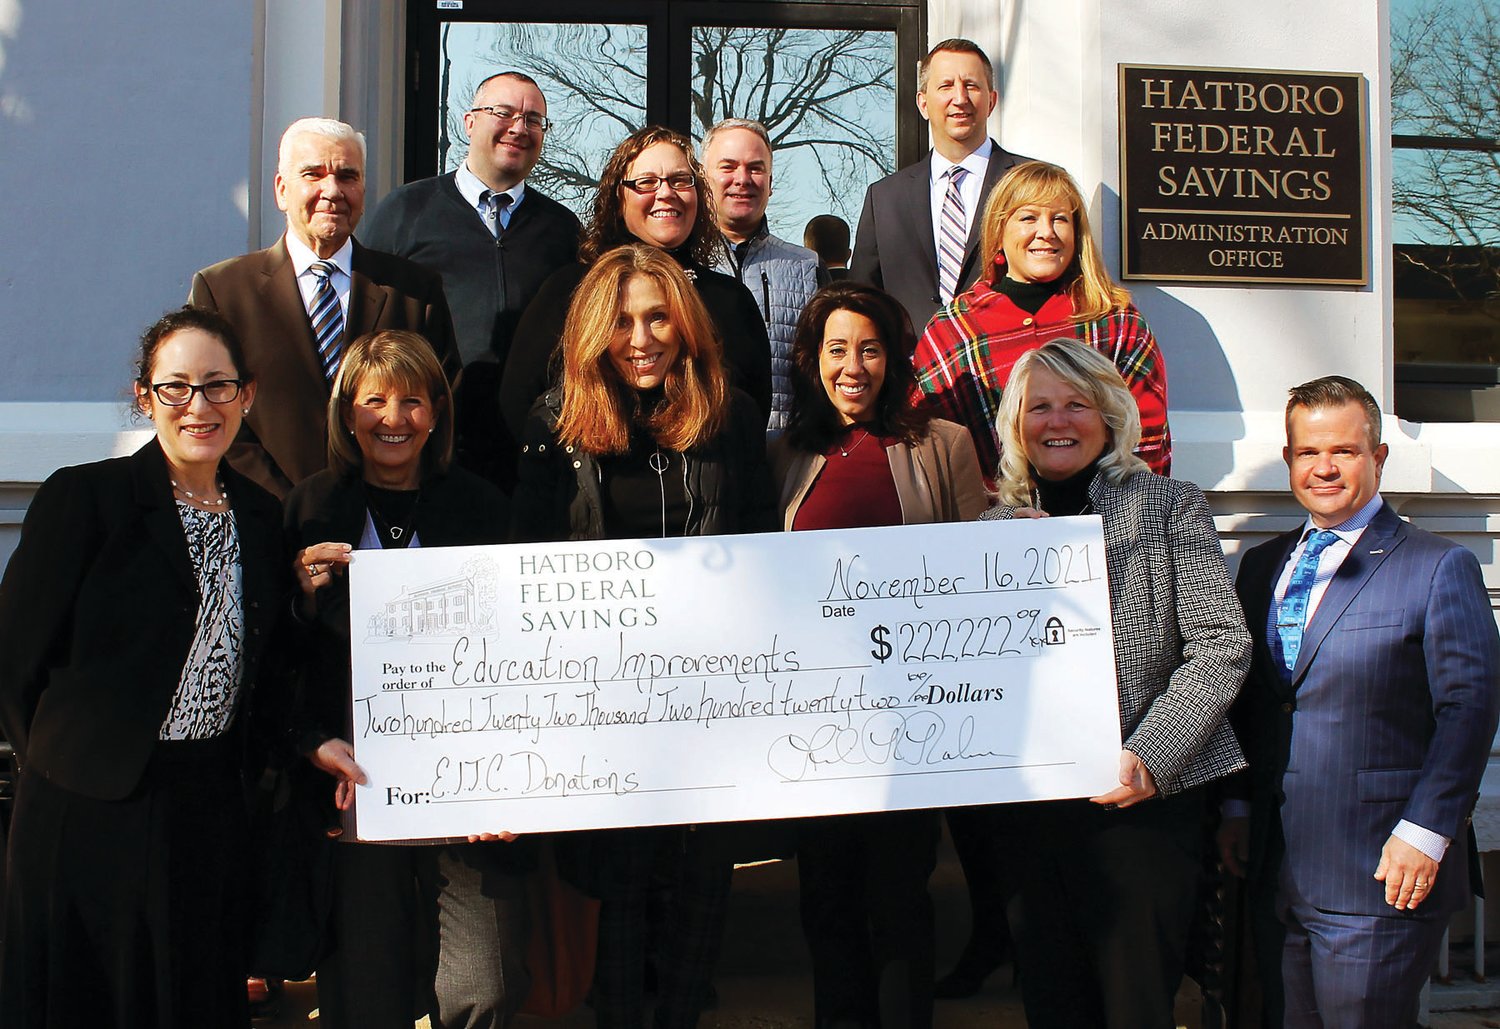 Accepting grants from Hatboro Federal Savings on behalf of their organizations are: from left, back row, Bob Phillips, Centennial Education Foundation; Michael Celec, Union Library of Hatboro; TaraLee Kepner, Hatboro-Horsham Education Foundation; Jim Owens, Upper Dublin Education Foundation; and Dr. Scott Eveslage, Hatboro-Horsham Education Foundation; and from left, front row, Patricia Smallacombe, Bucks County Community College Foundation; Carolyn Fisher, Centennial Education Foundation; Michelle Boas, Upper Dublin Education Foundation; Rachael Kurtz, Big Brothers Big Sisters of Bucks County; Linda Roehner, CEO, Hatboro Federal Savings; and Andrew States, Bucks County Community College Foundation. Representatives from Upper Moreland Education Foundation and CB Cares are not pictured.